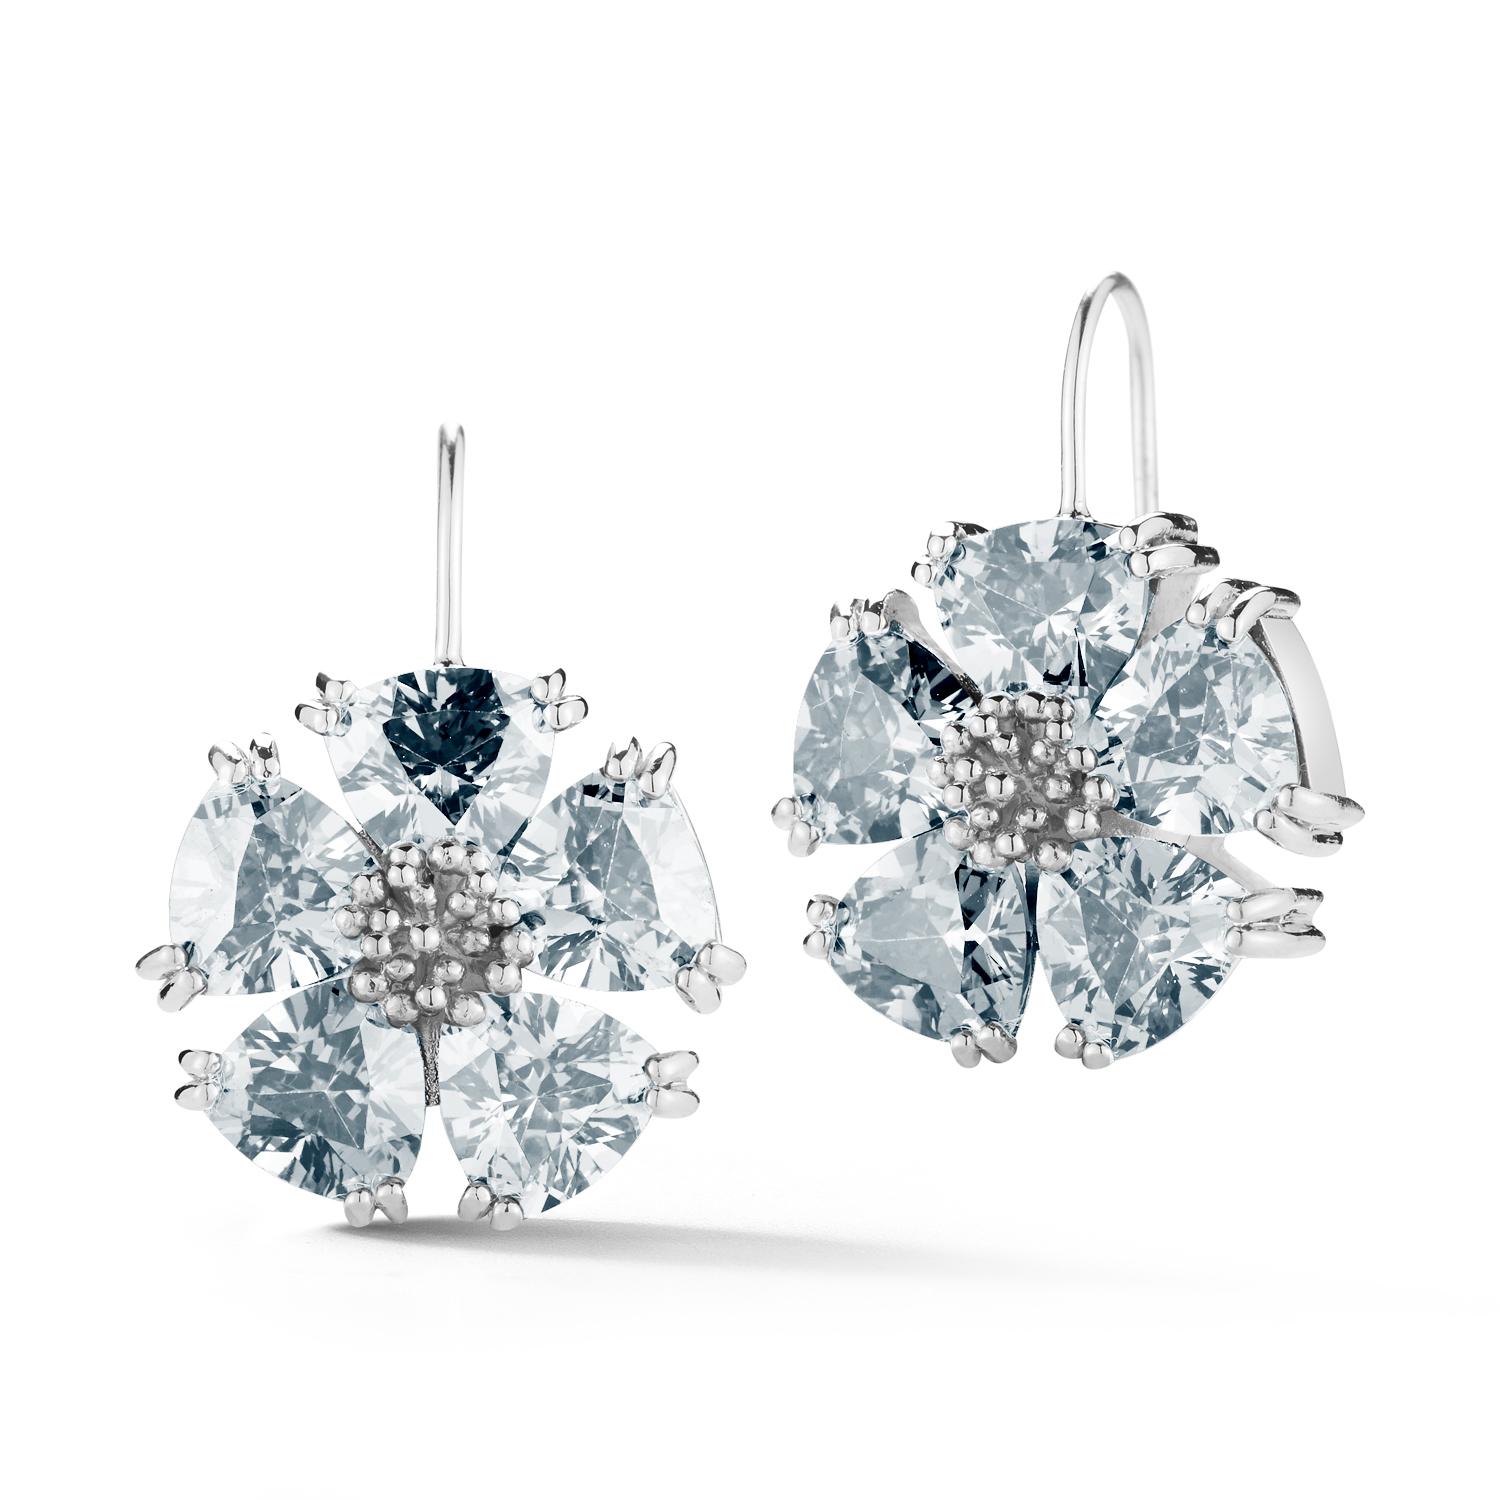 Designed in NYC

.925 Sterling Silver 10 x 7mm Dark Blue Topaz Blossom Stone Wire Drop Earrings. No matter the season, allow natural beauty to surround you wherever you go. Blossom stone wire drop earrings: 

Sterling silver 
High-polish